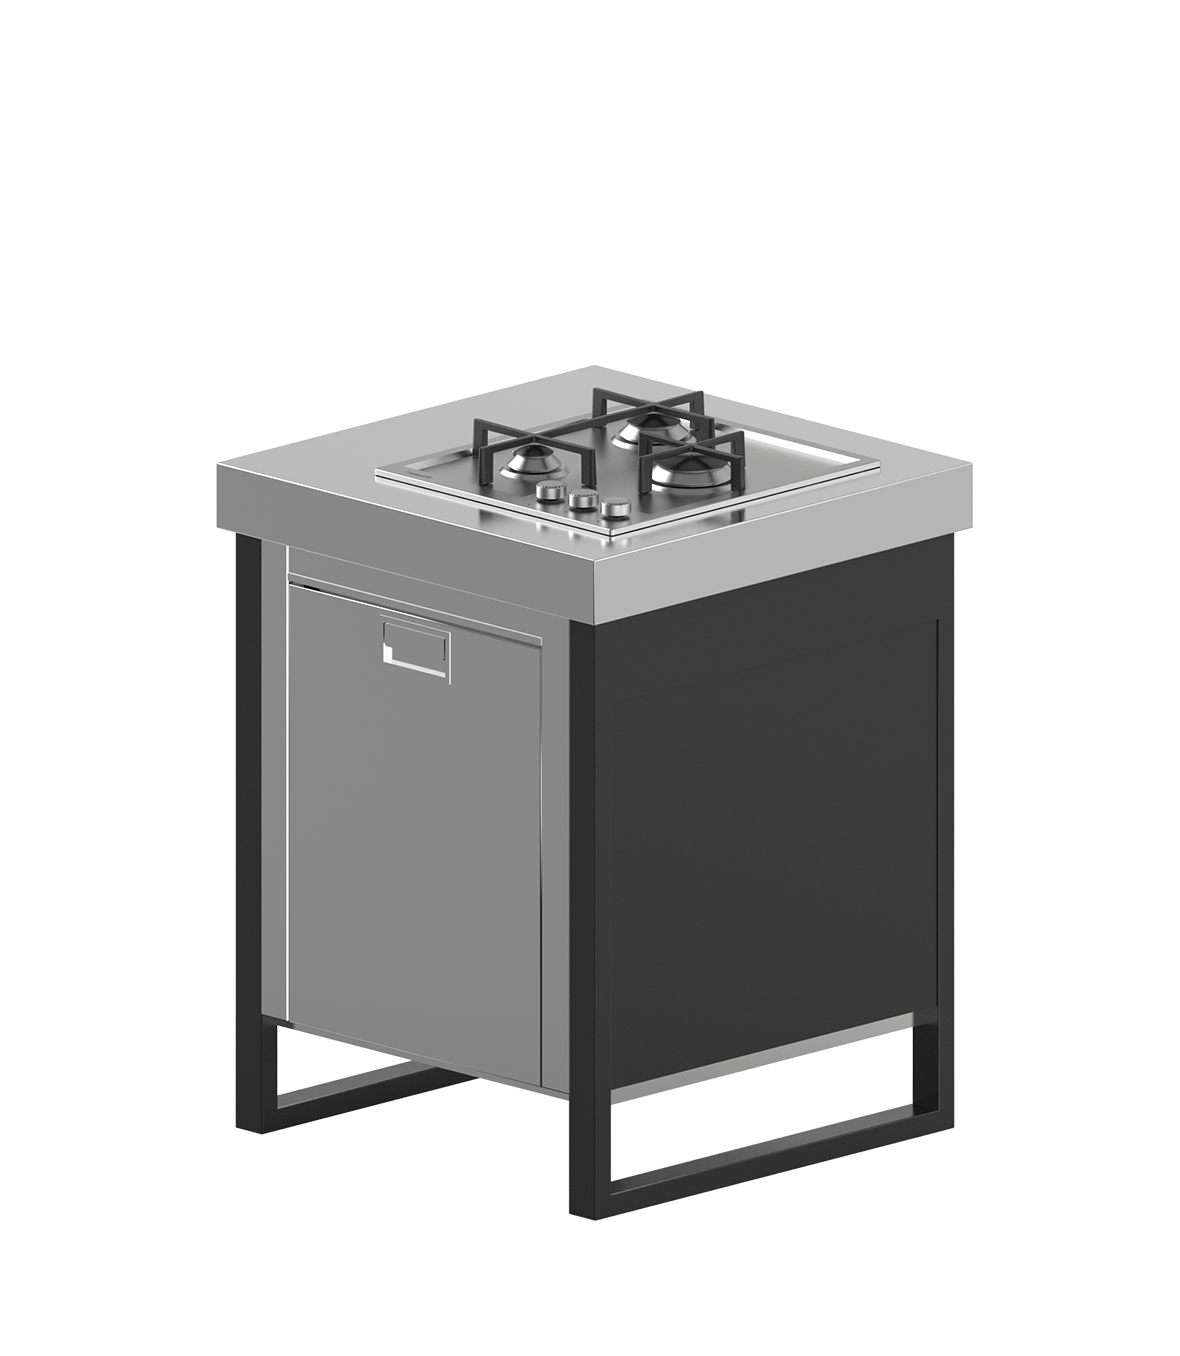 Fridge and gas cooking module 700